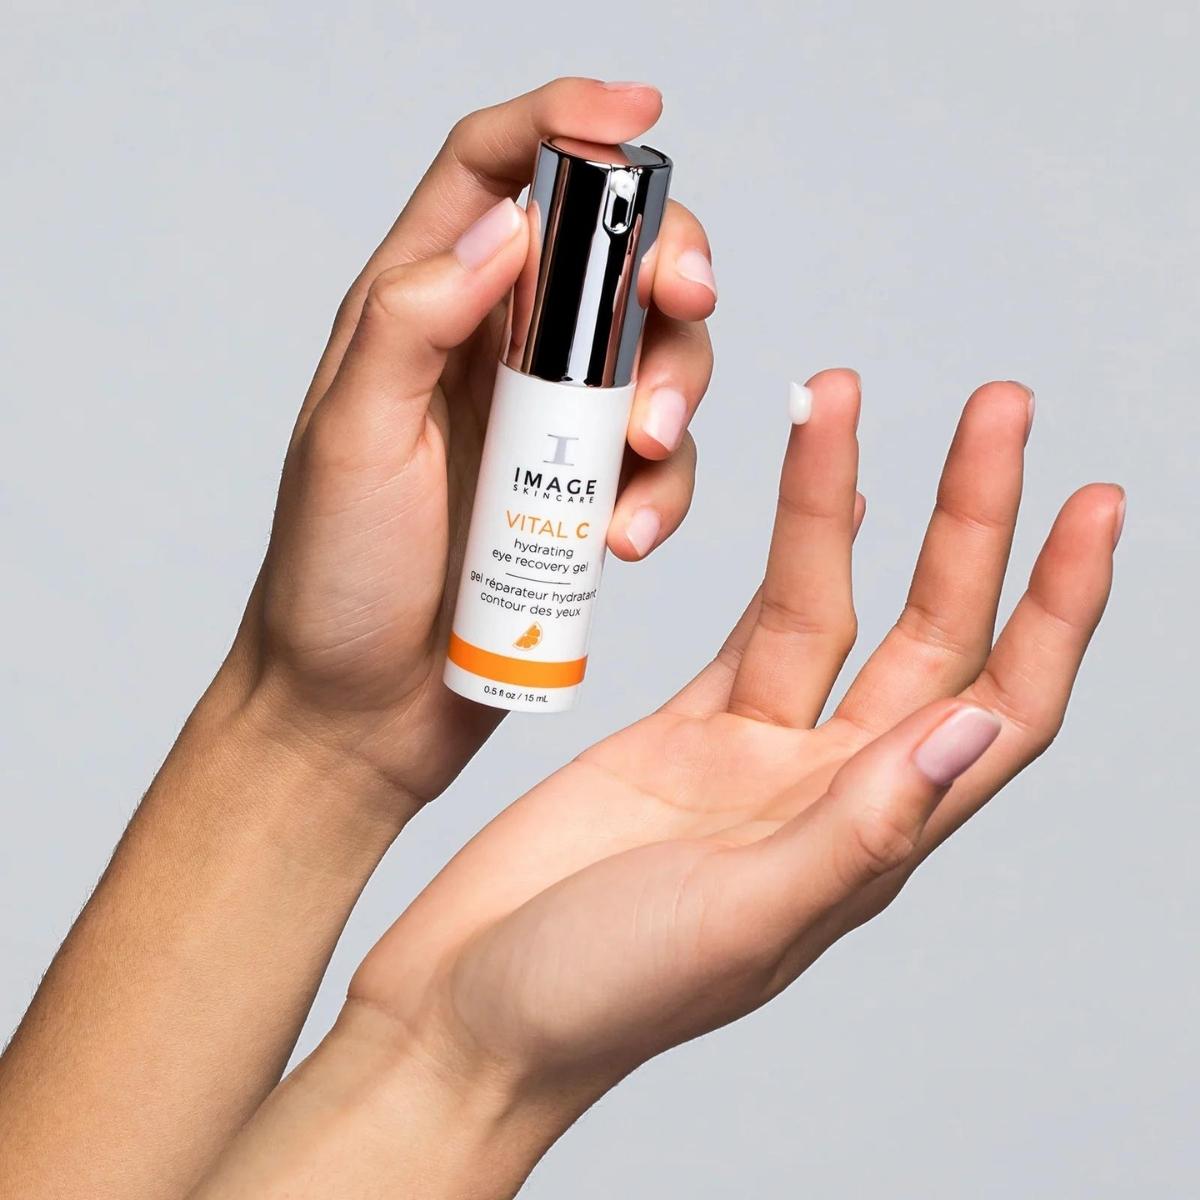 IMAGE Skincare Vital C Hydrating Eye Recovery Gel on hands 